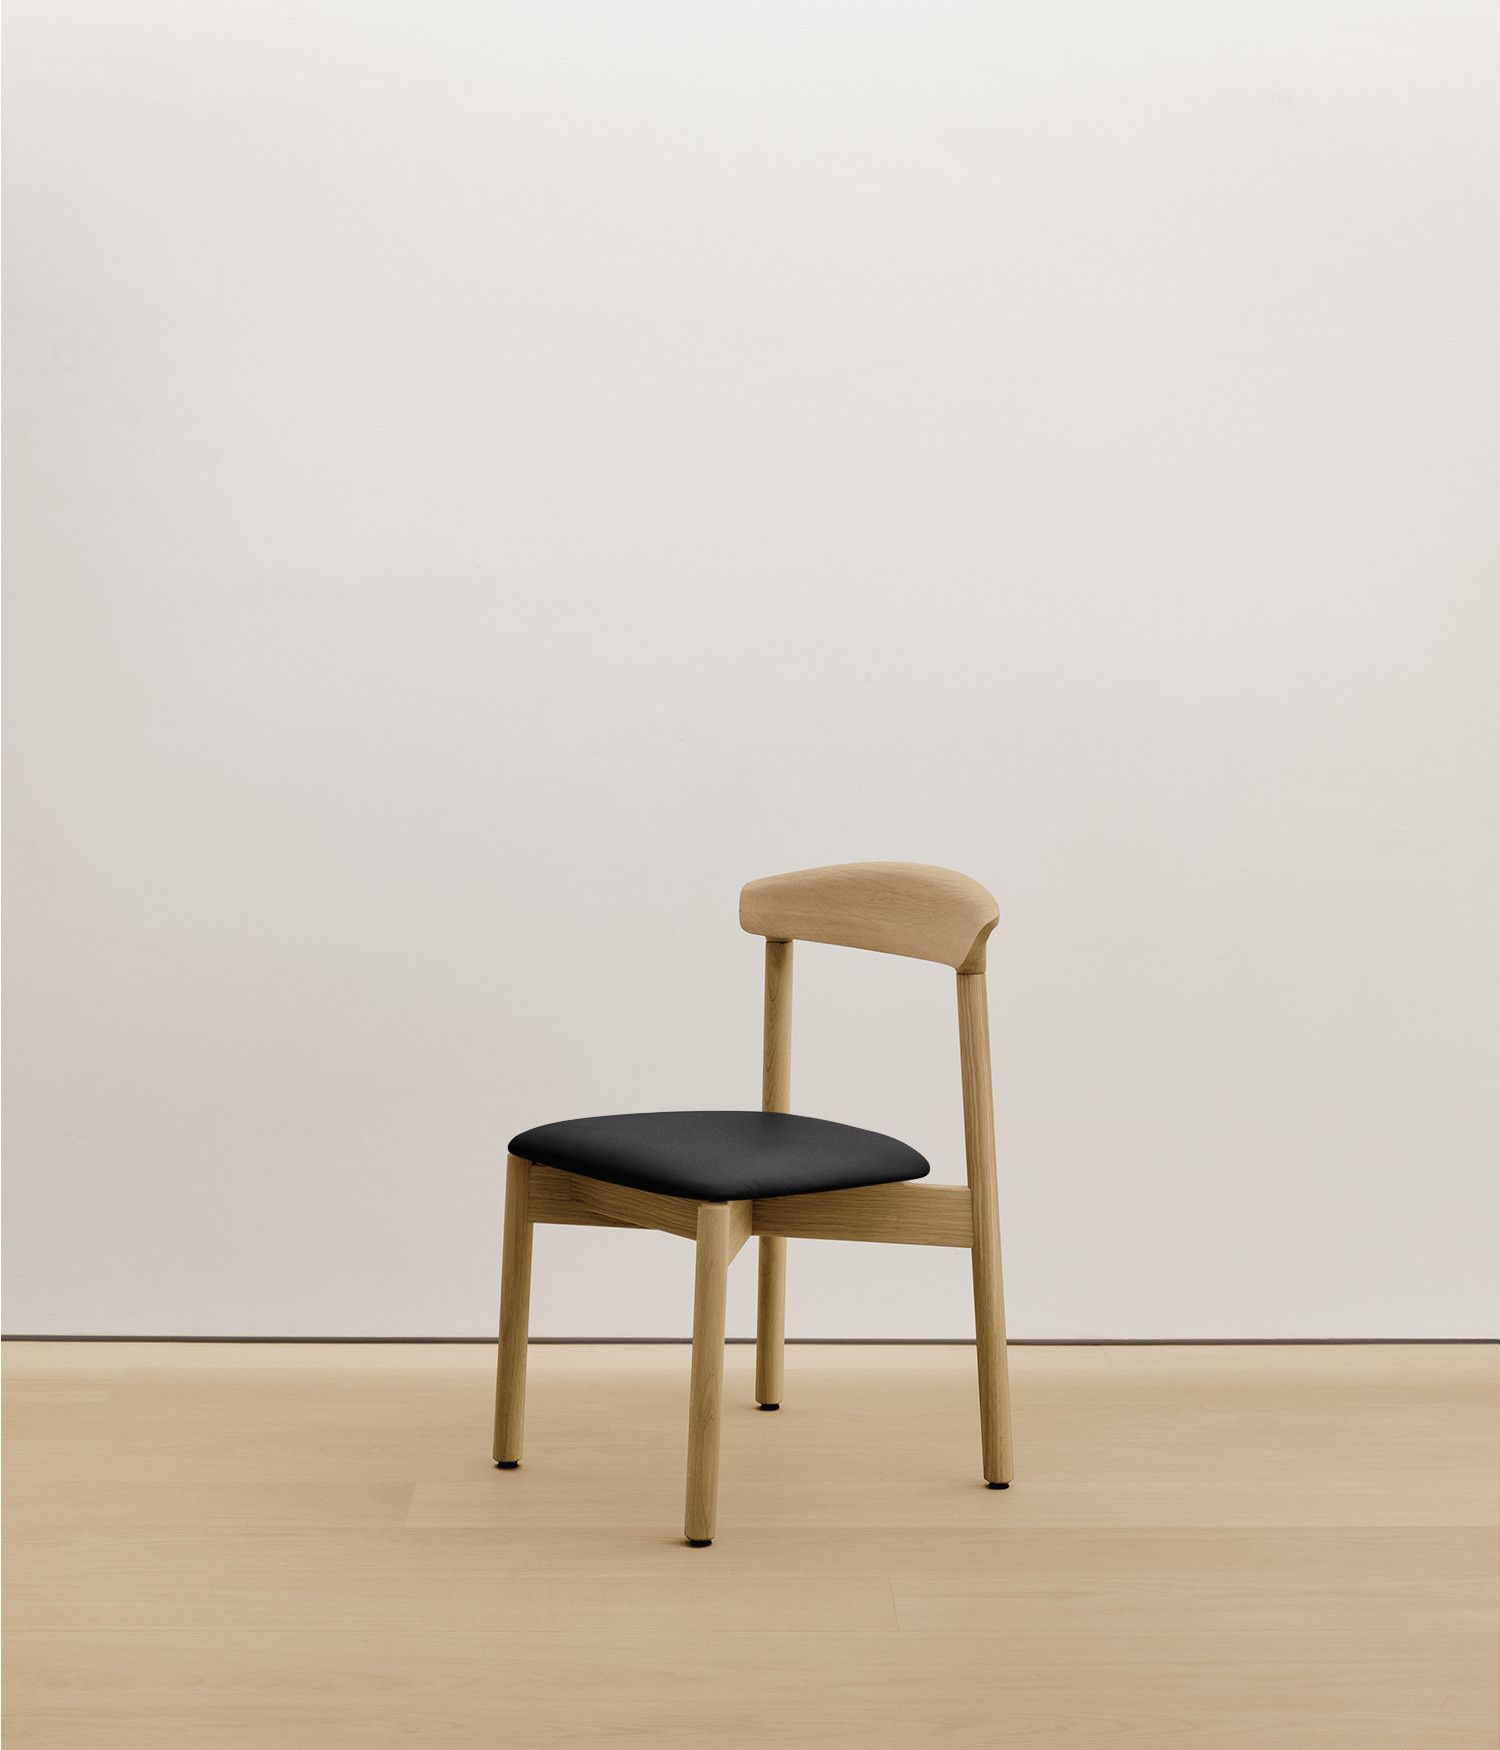  white-oak chair with black color upholstered seat